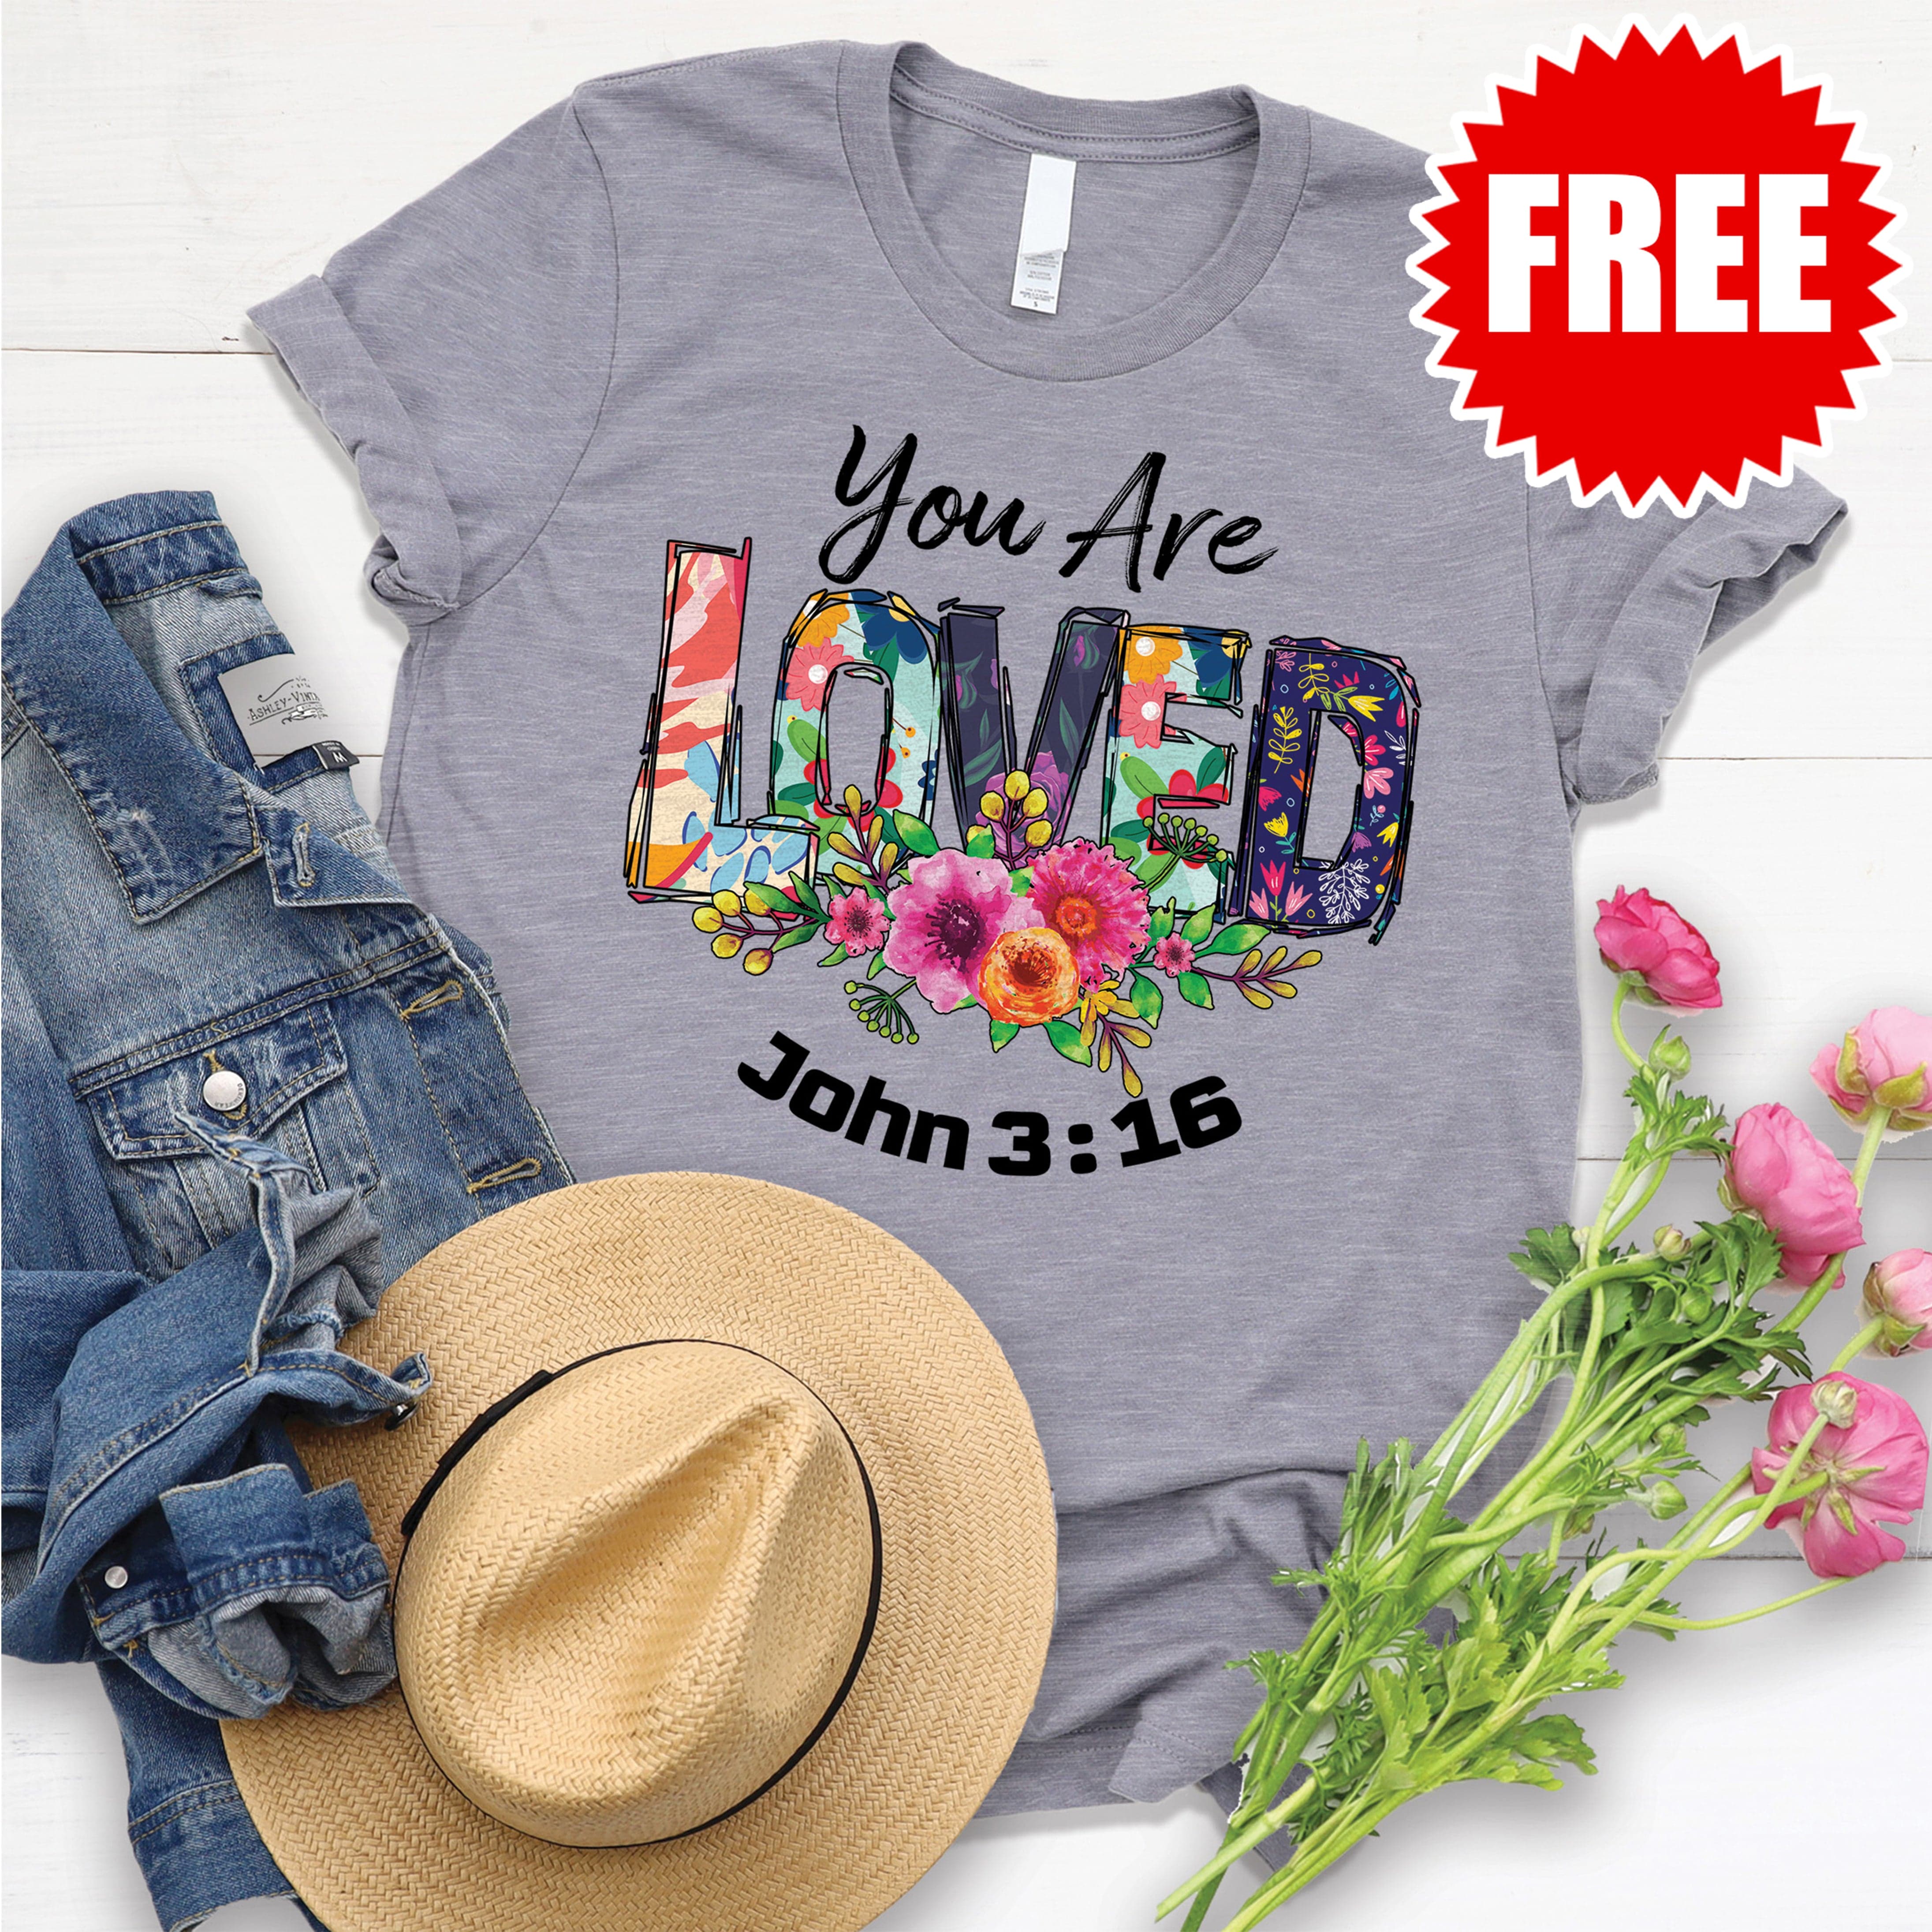 You Are Loved Tee - F